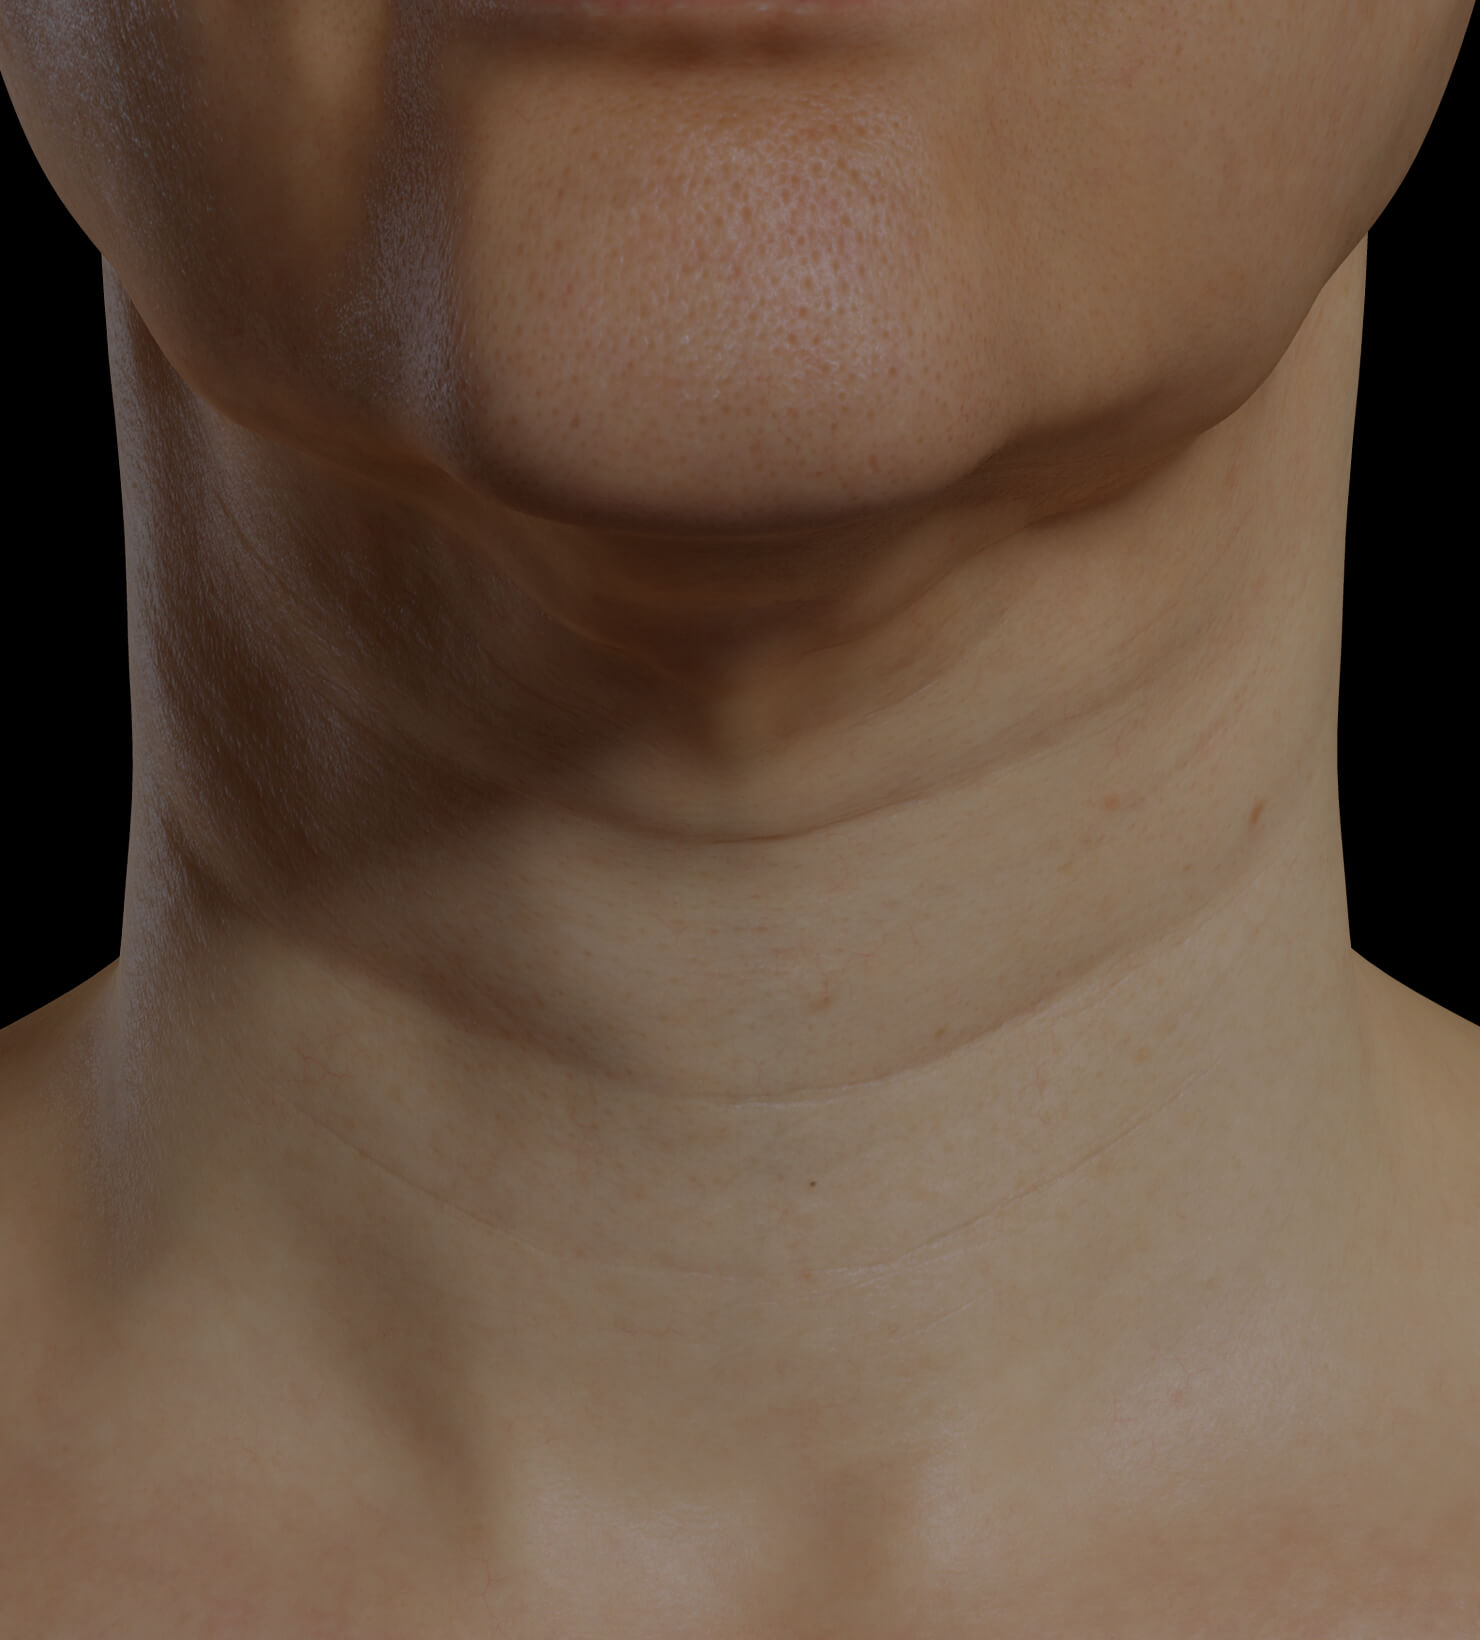 Clinique Chloé female patient with neck skin laxity treated with Profound RF for neck skin tightening